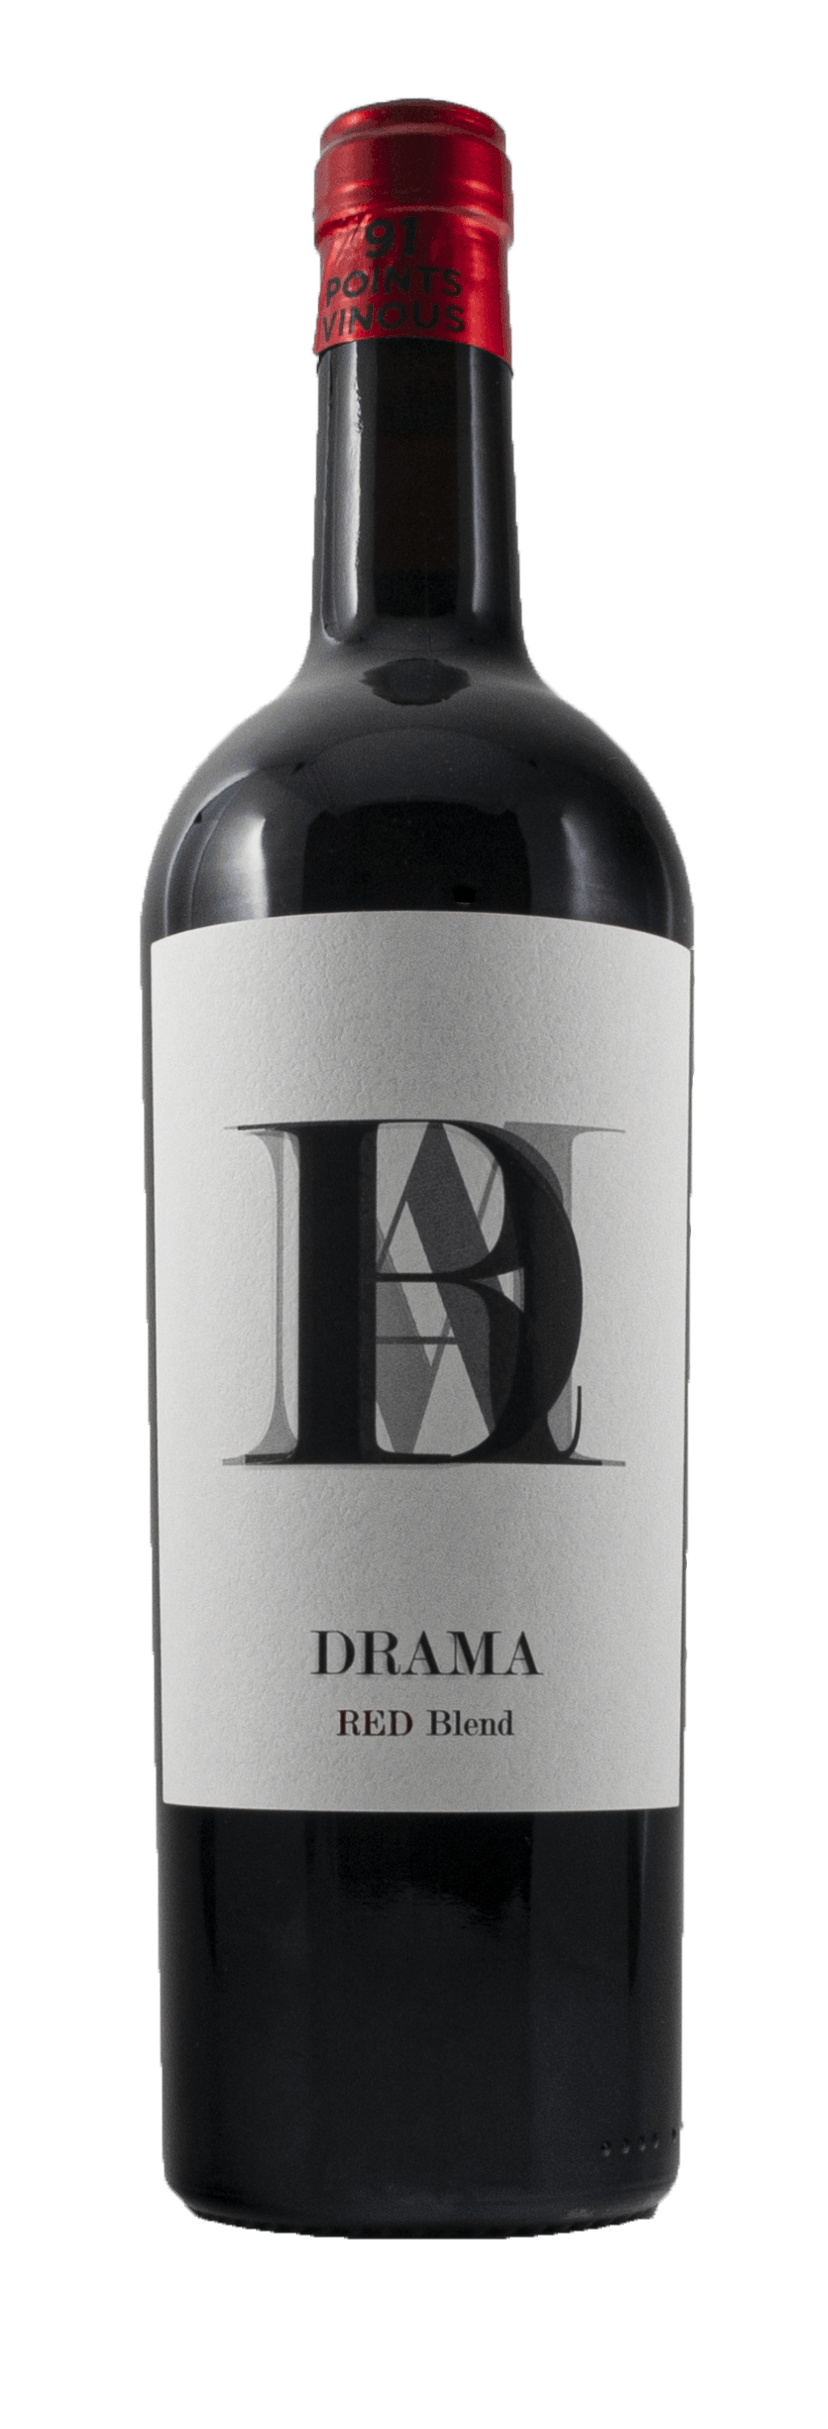 gøre ondt stak vaccination Familia Bastida Drama Red Blend VNS 750ml - The Wine Guy